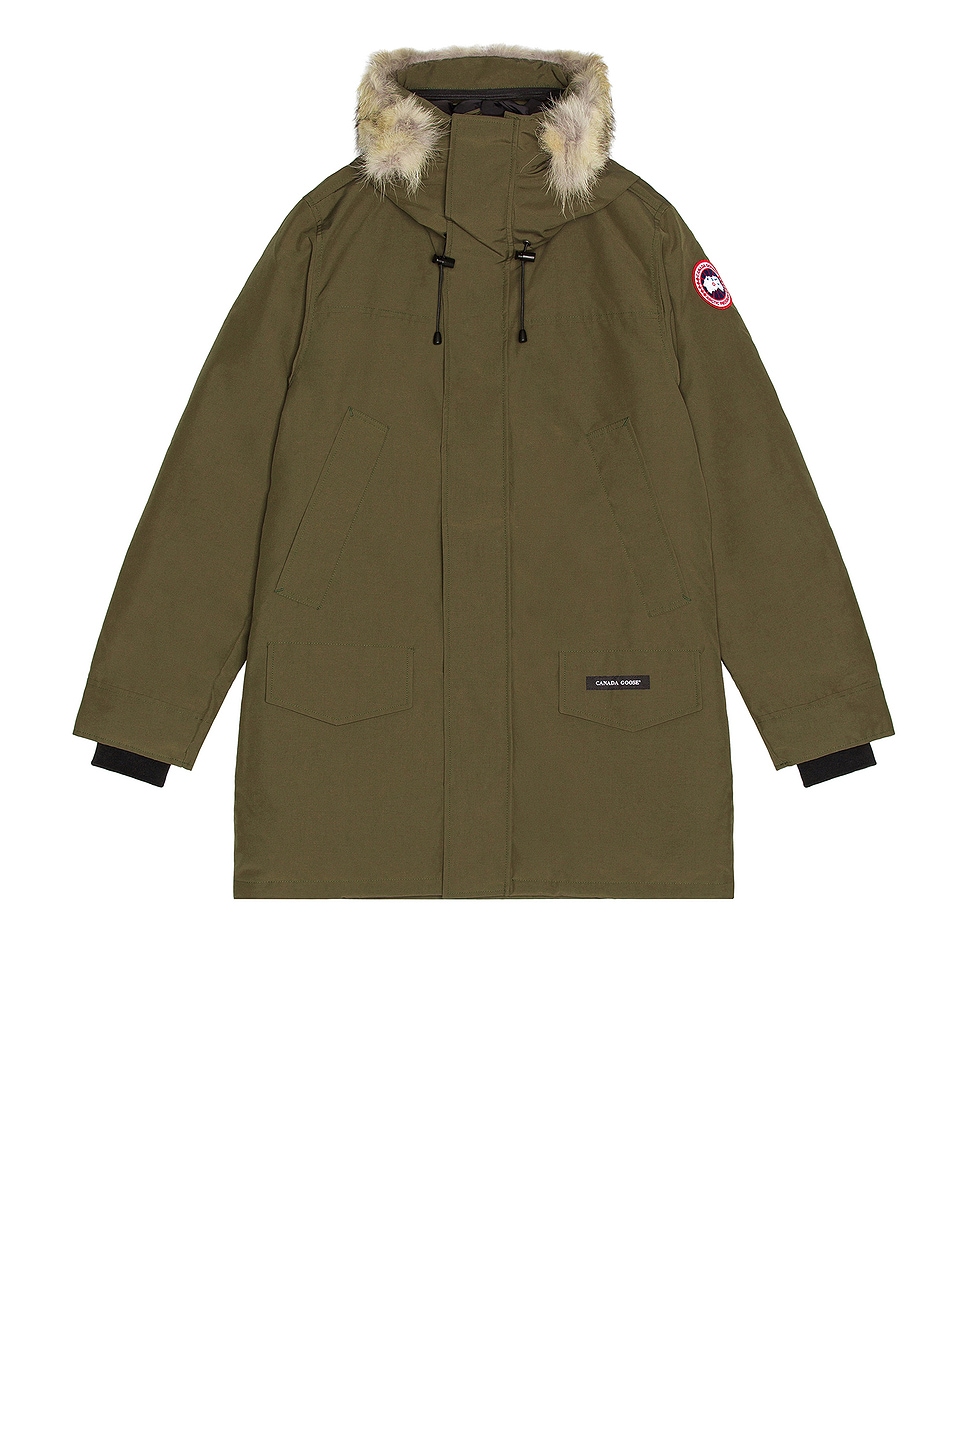 Image 1 of Canada Goose Langford Parka in Military Green